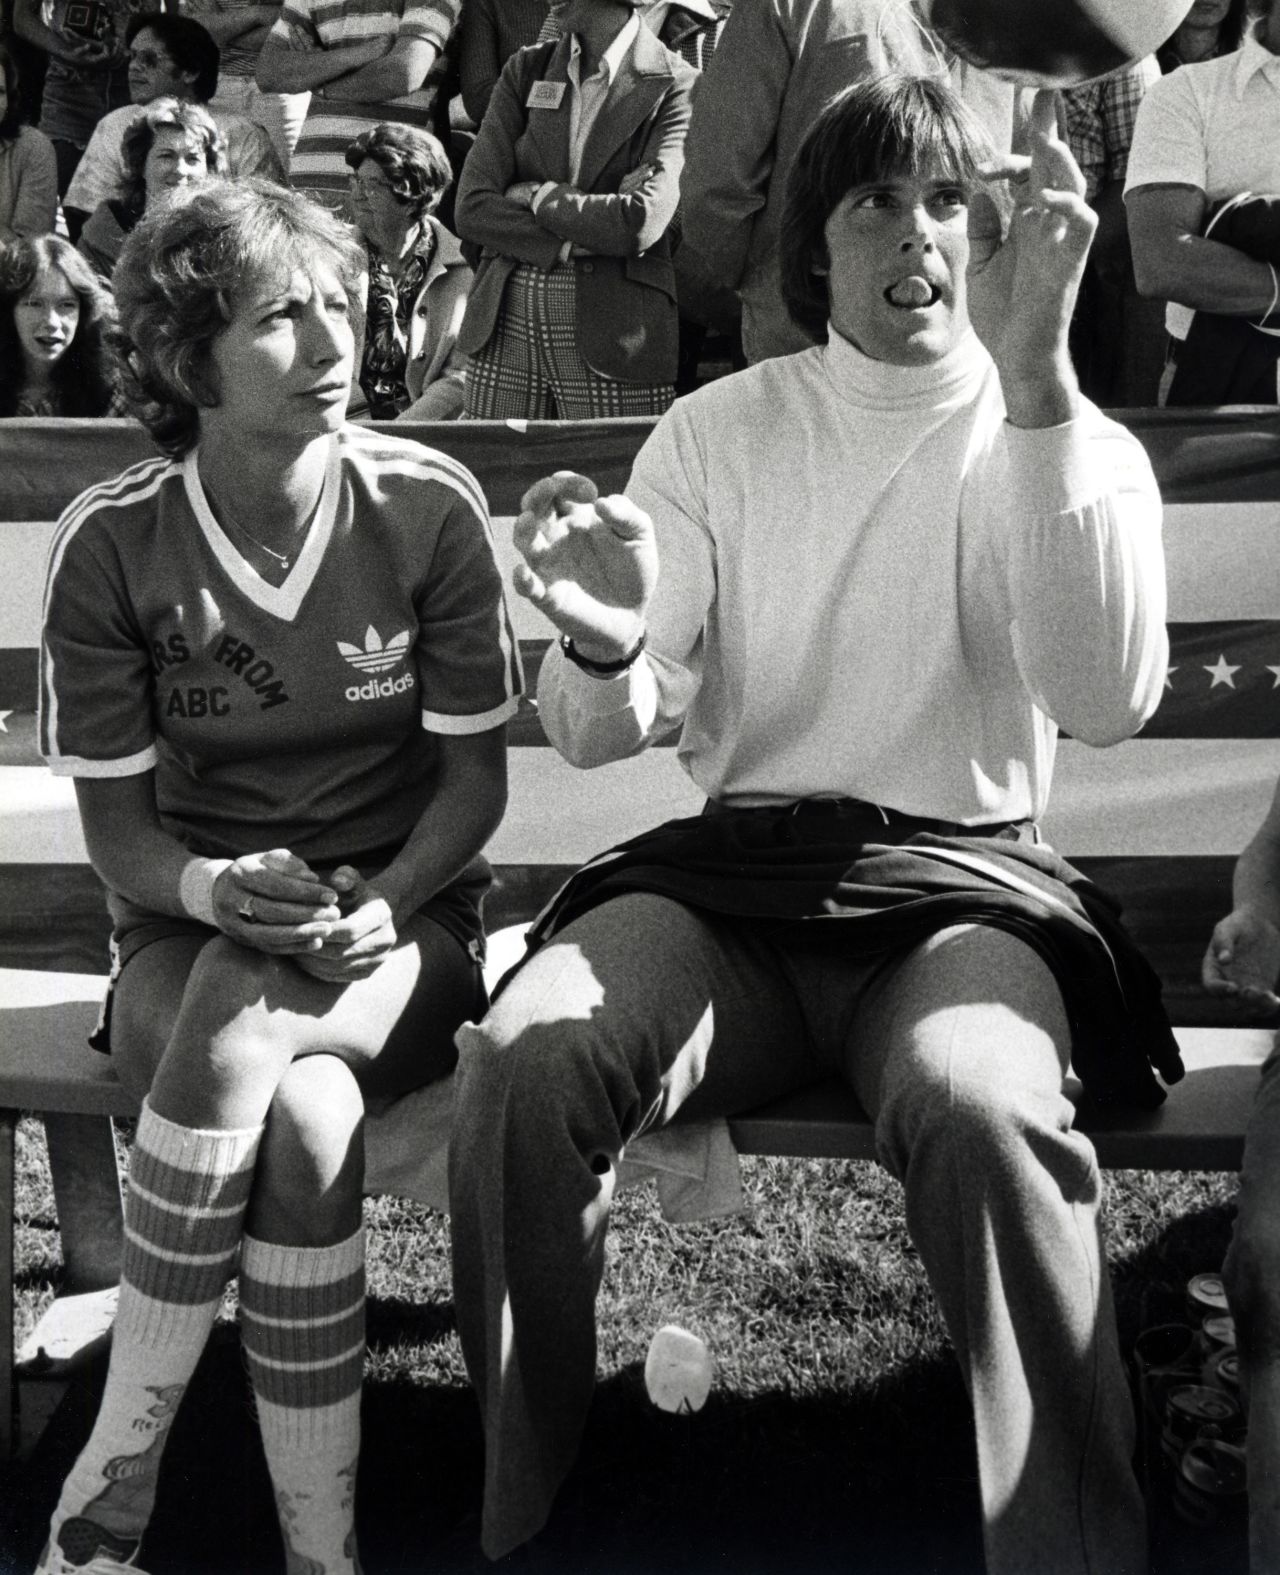 Penny Marshall and Jenner take part in a taping of the "Battle of the Network Stars" TV show on February 5, 1977.